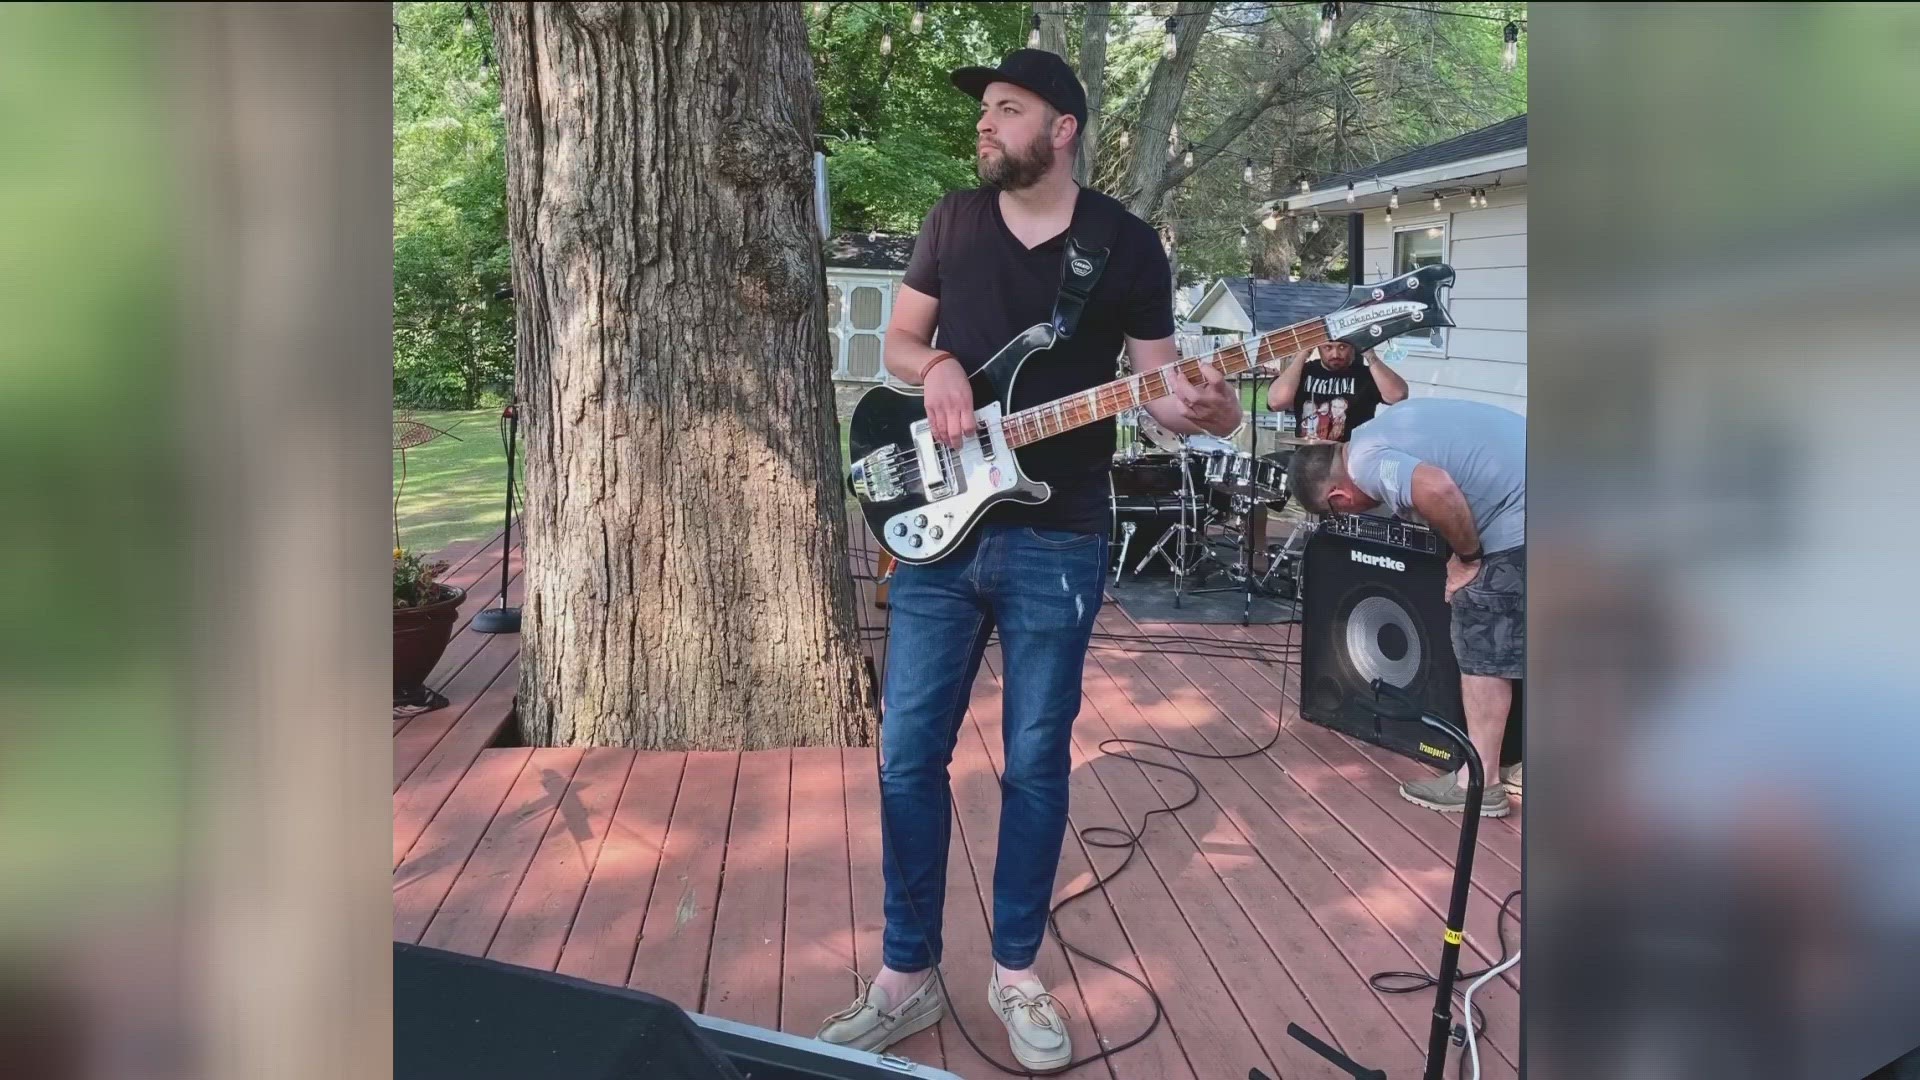 39-year-old Cory Stevenson, who played bass in the Cedar Creek worship band, passed away unexpectedly earlier this week leaving behind a wife and three children.